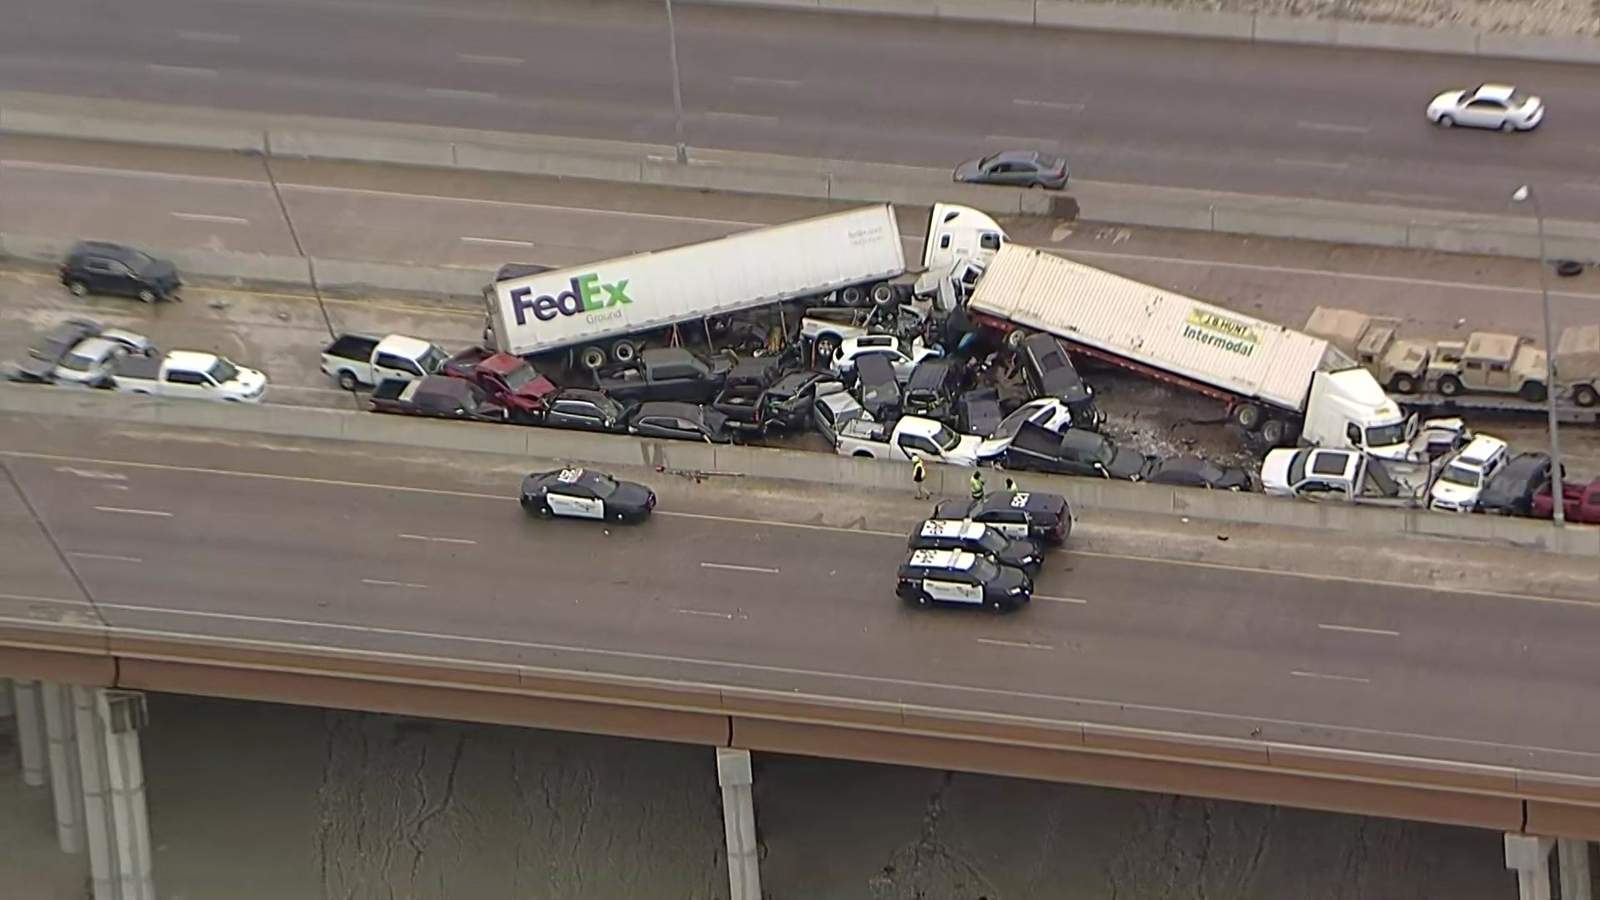 Fort Worth police say 6 people died as result of massive pileup on icy Texas interstate involving more than 100 vehicles